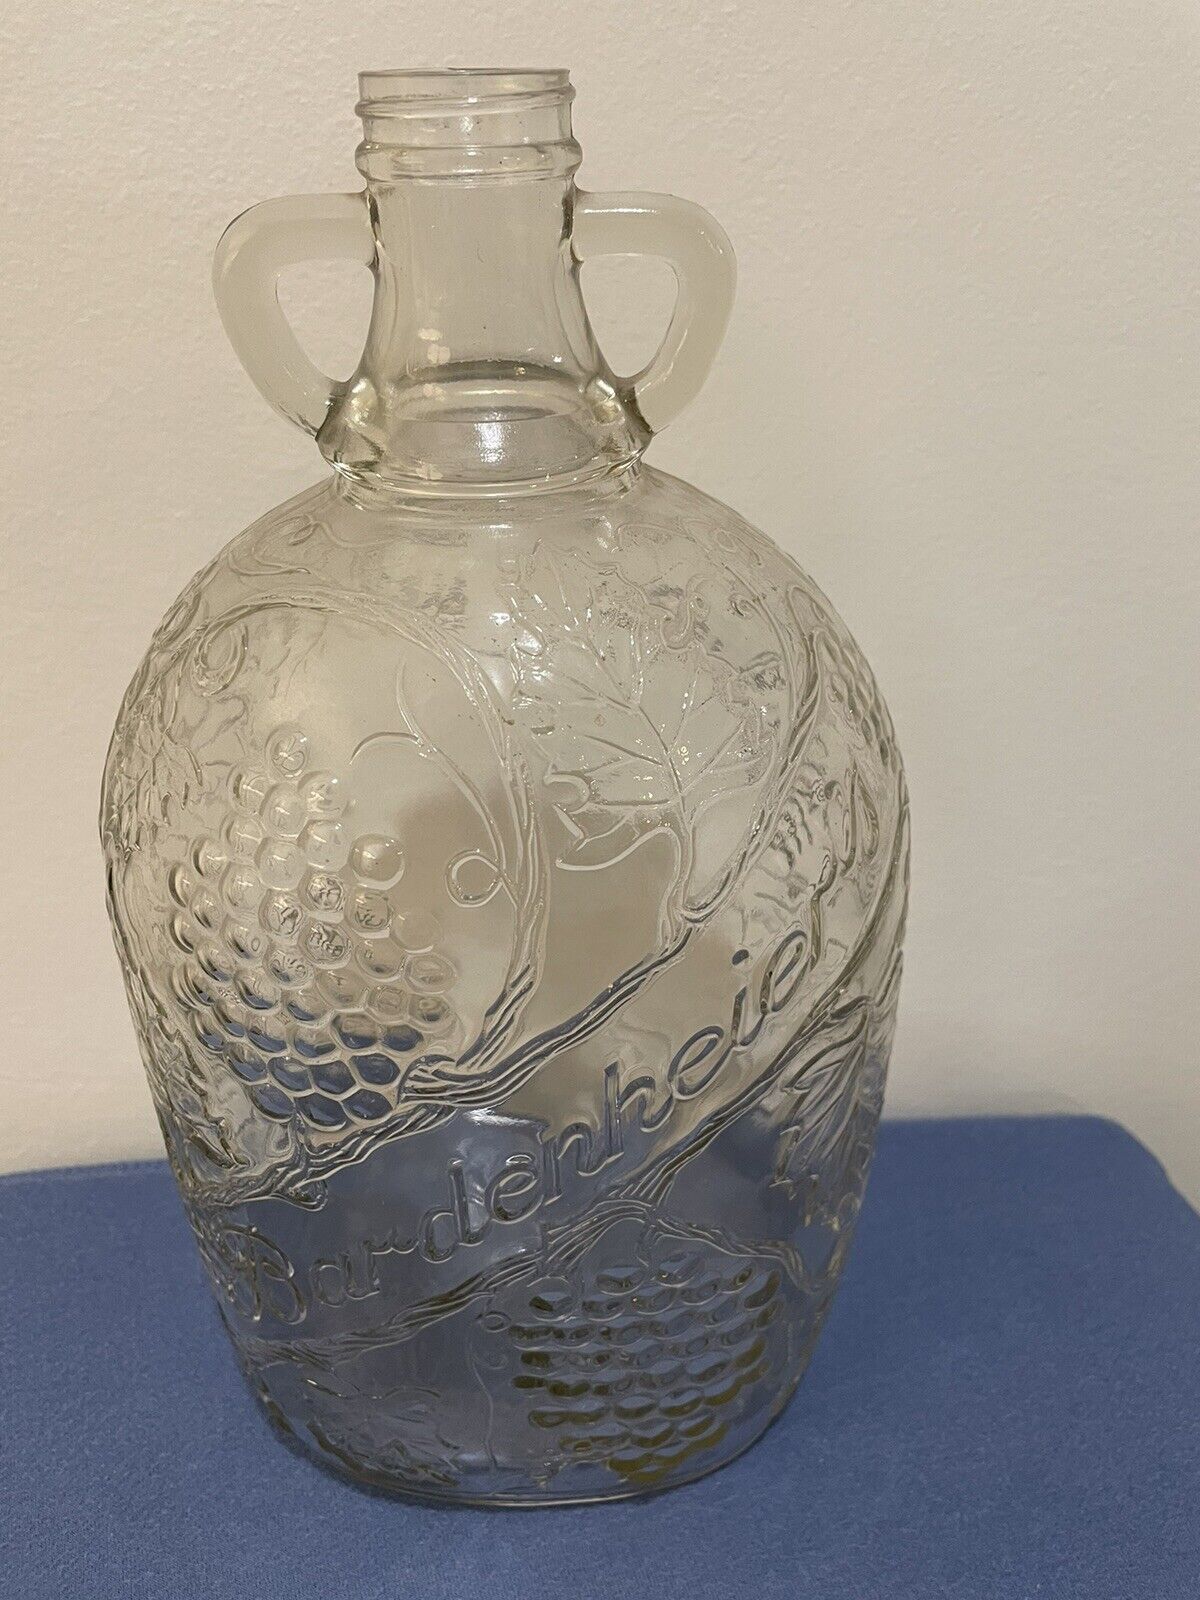 Vintage Bardenheier embossed clear glass one gallon wine jug with two handles